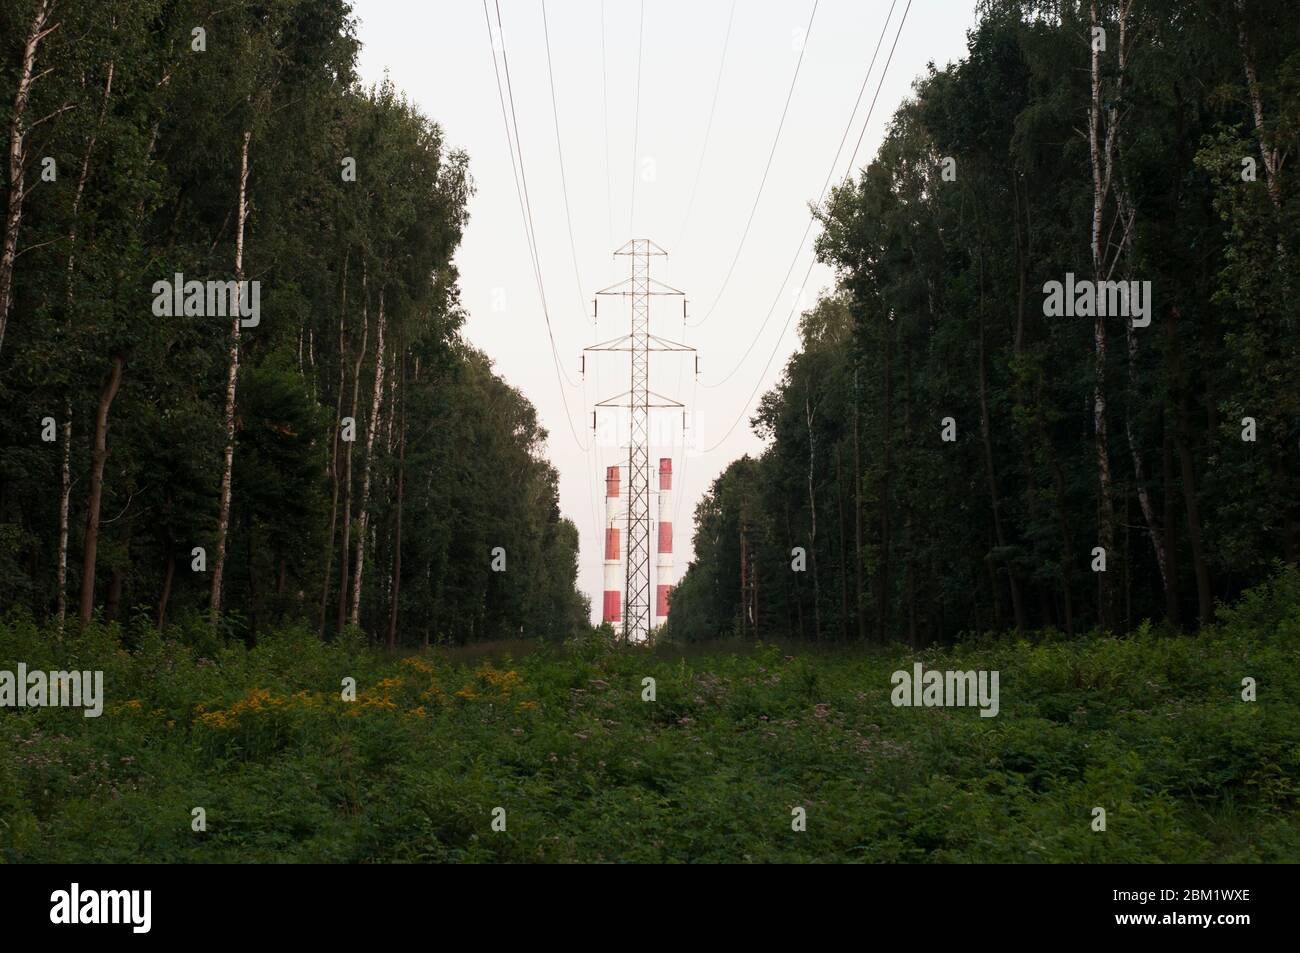 two white and red chambers from coal factories and electric wires surrounded by forest Stock Photo